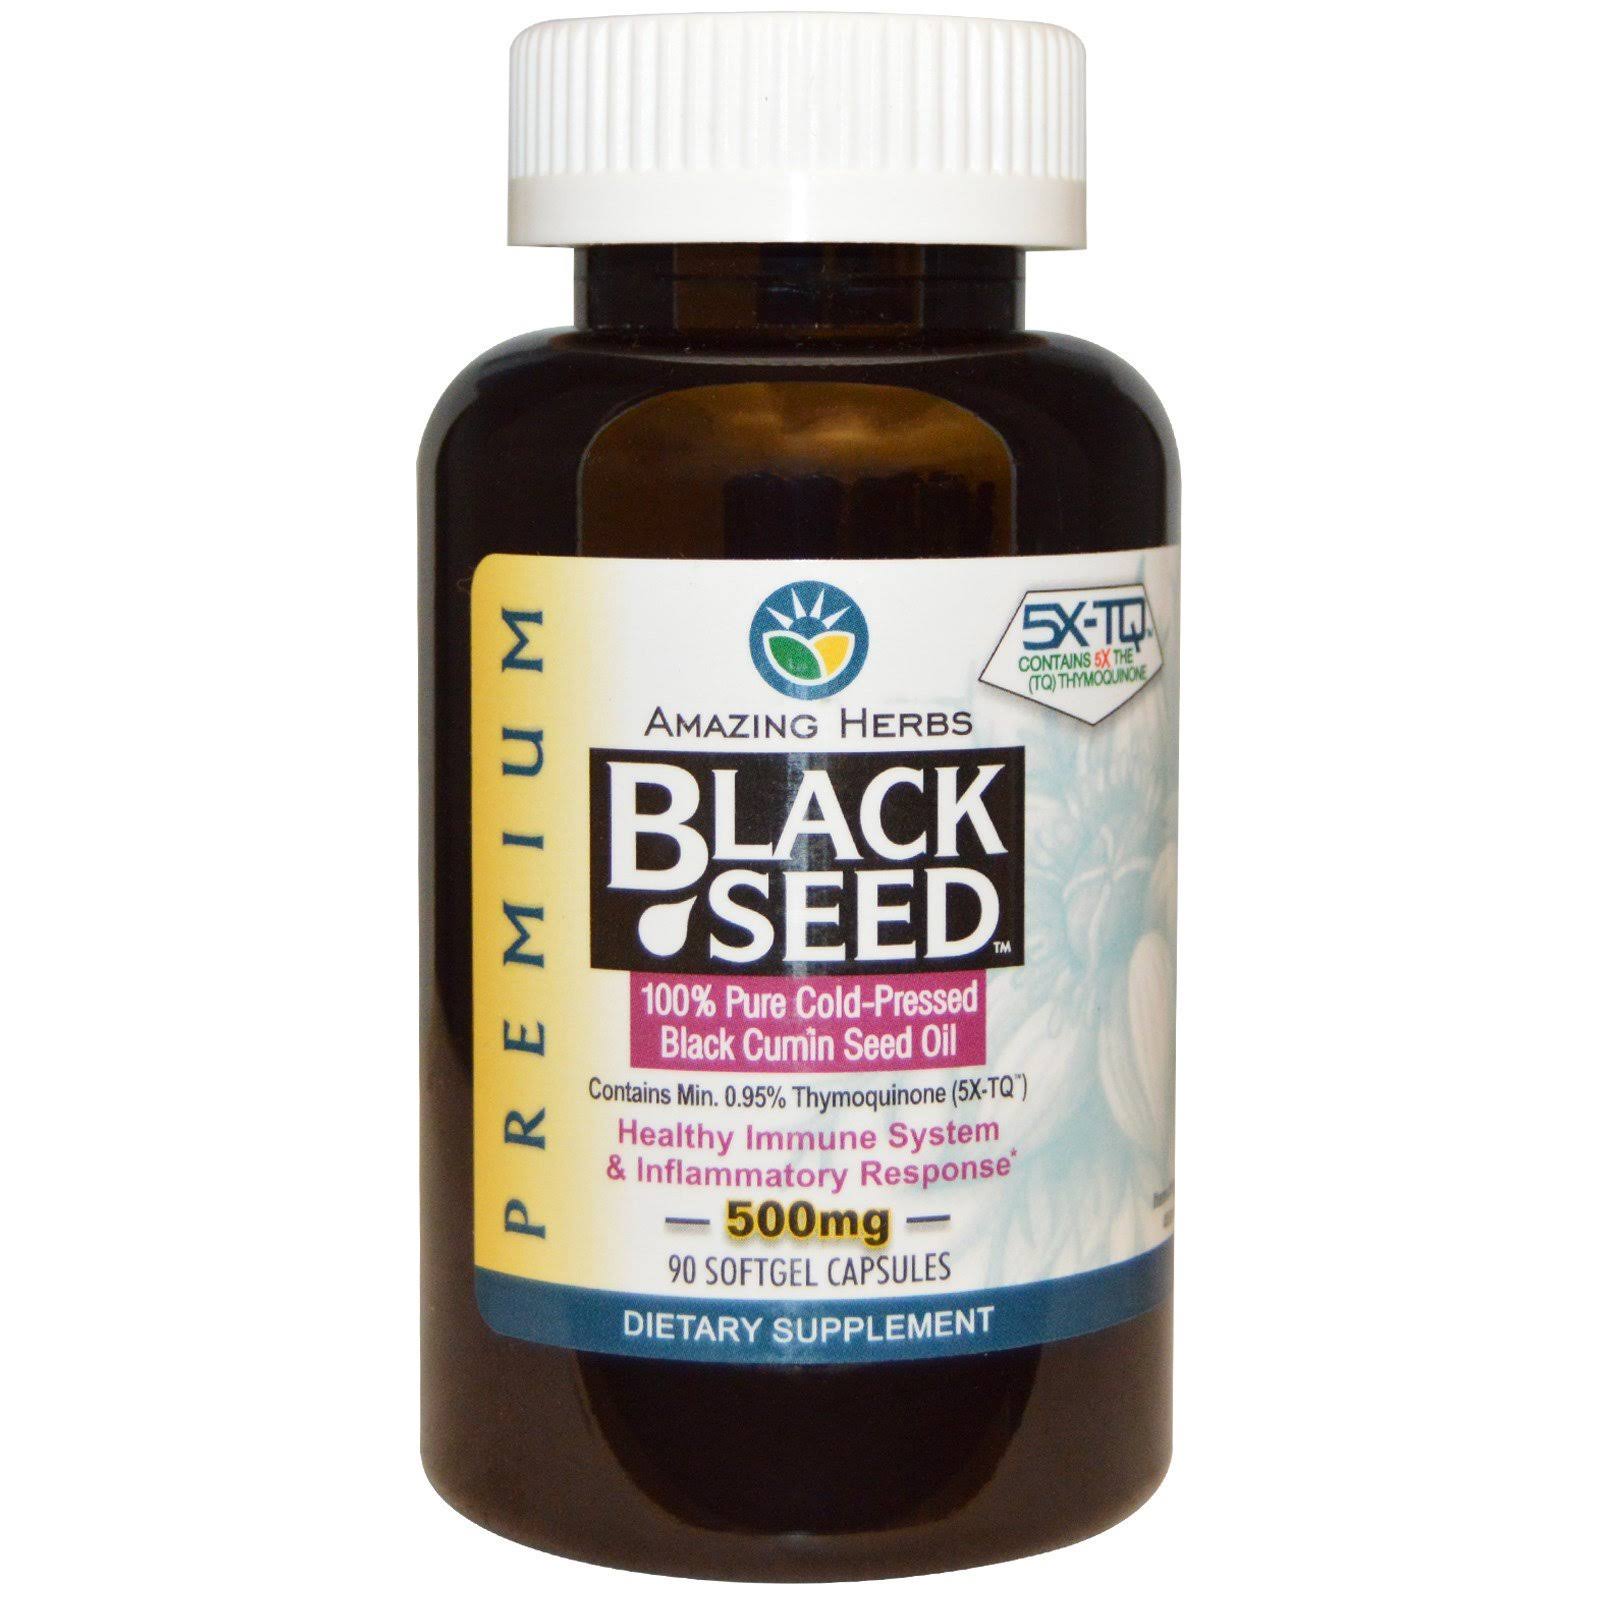 Amazing Herbs Cold-Pressed Black Seed Oil Dietary Supplement - 90 Capsules